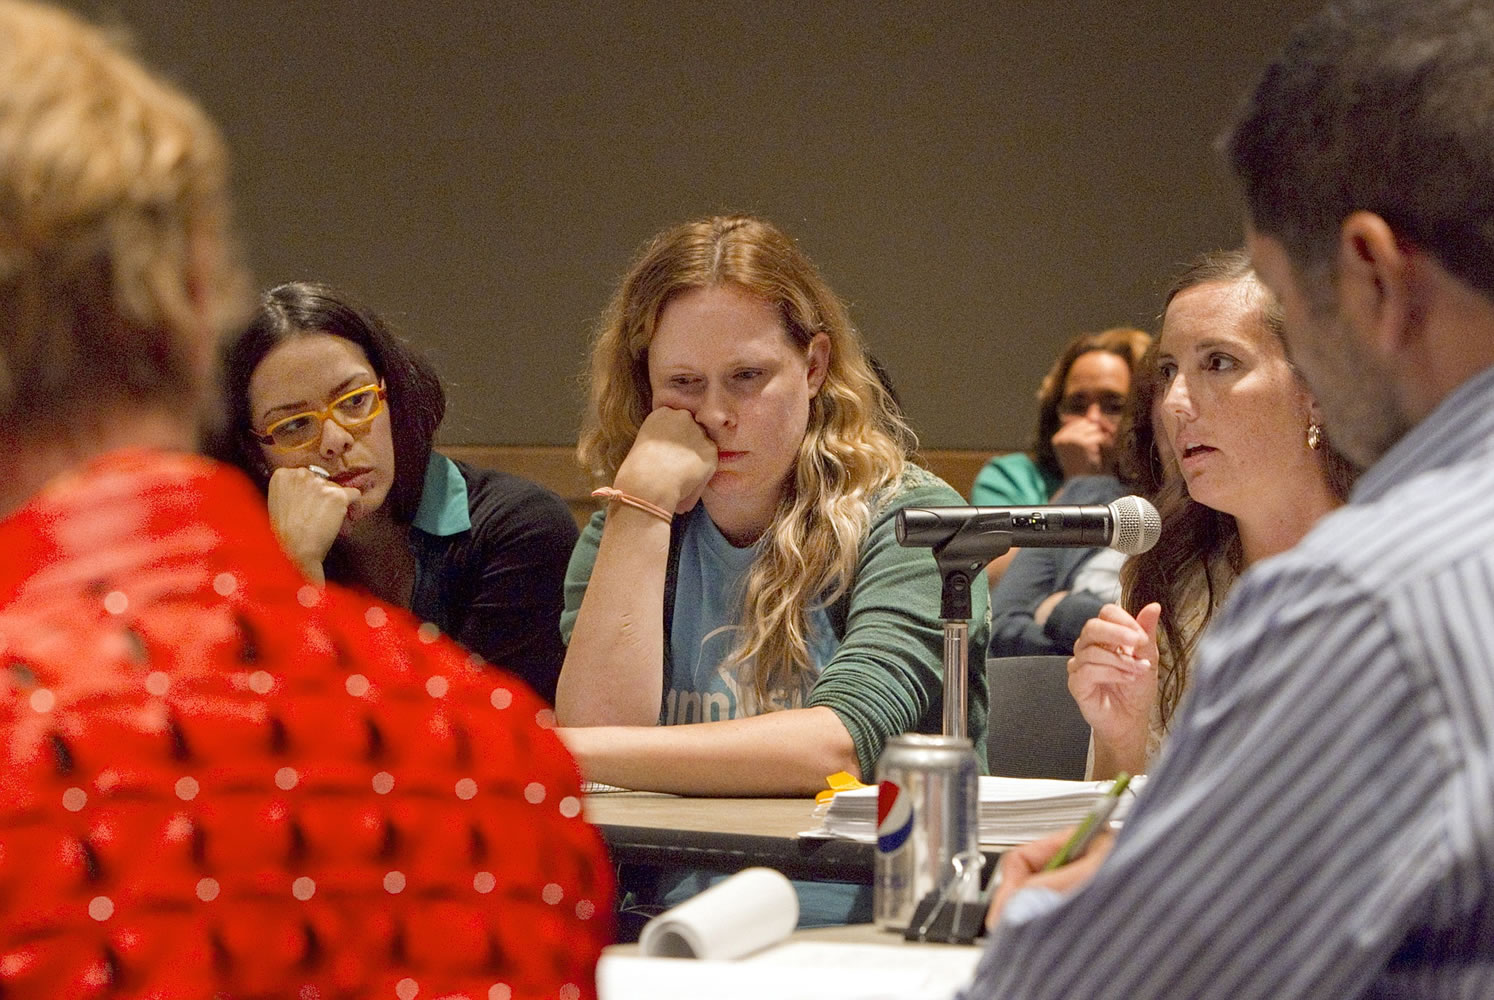 Sunnyside Charter School proponents Veronica Rivero Testamarck, left, Erin Martin, center, and Brittany Weaver, right, face the Washington State Charter School Commission  and answer questions at a commission meeting in Yakima on Thursday.